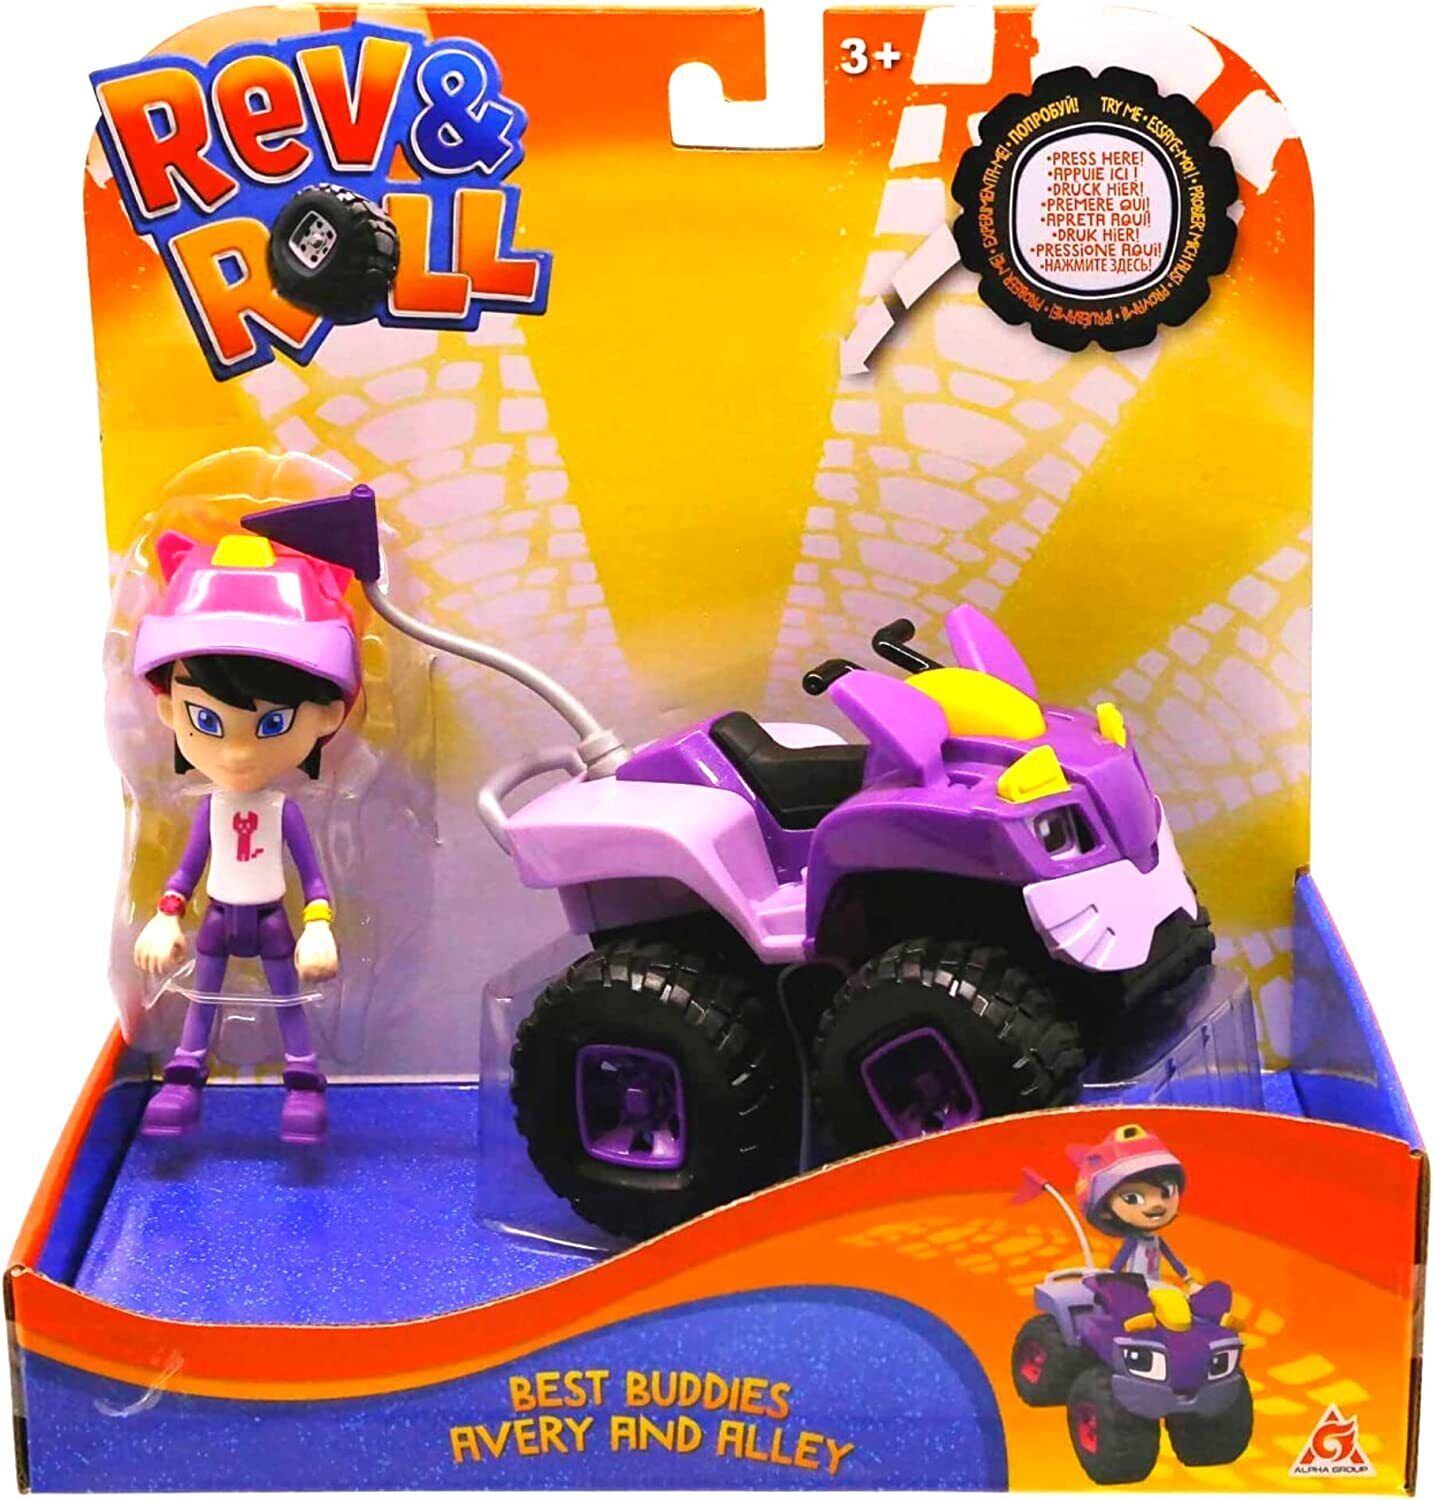 Rev & Roll Best Buddies Vehicle & Figure Avery & Alley and Mini Action Alley Quad Bike Vehicle - Toptoys2u